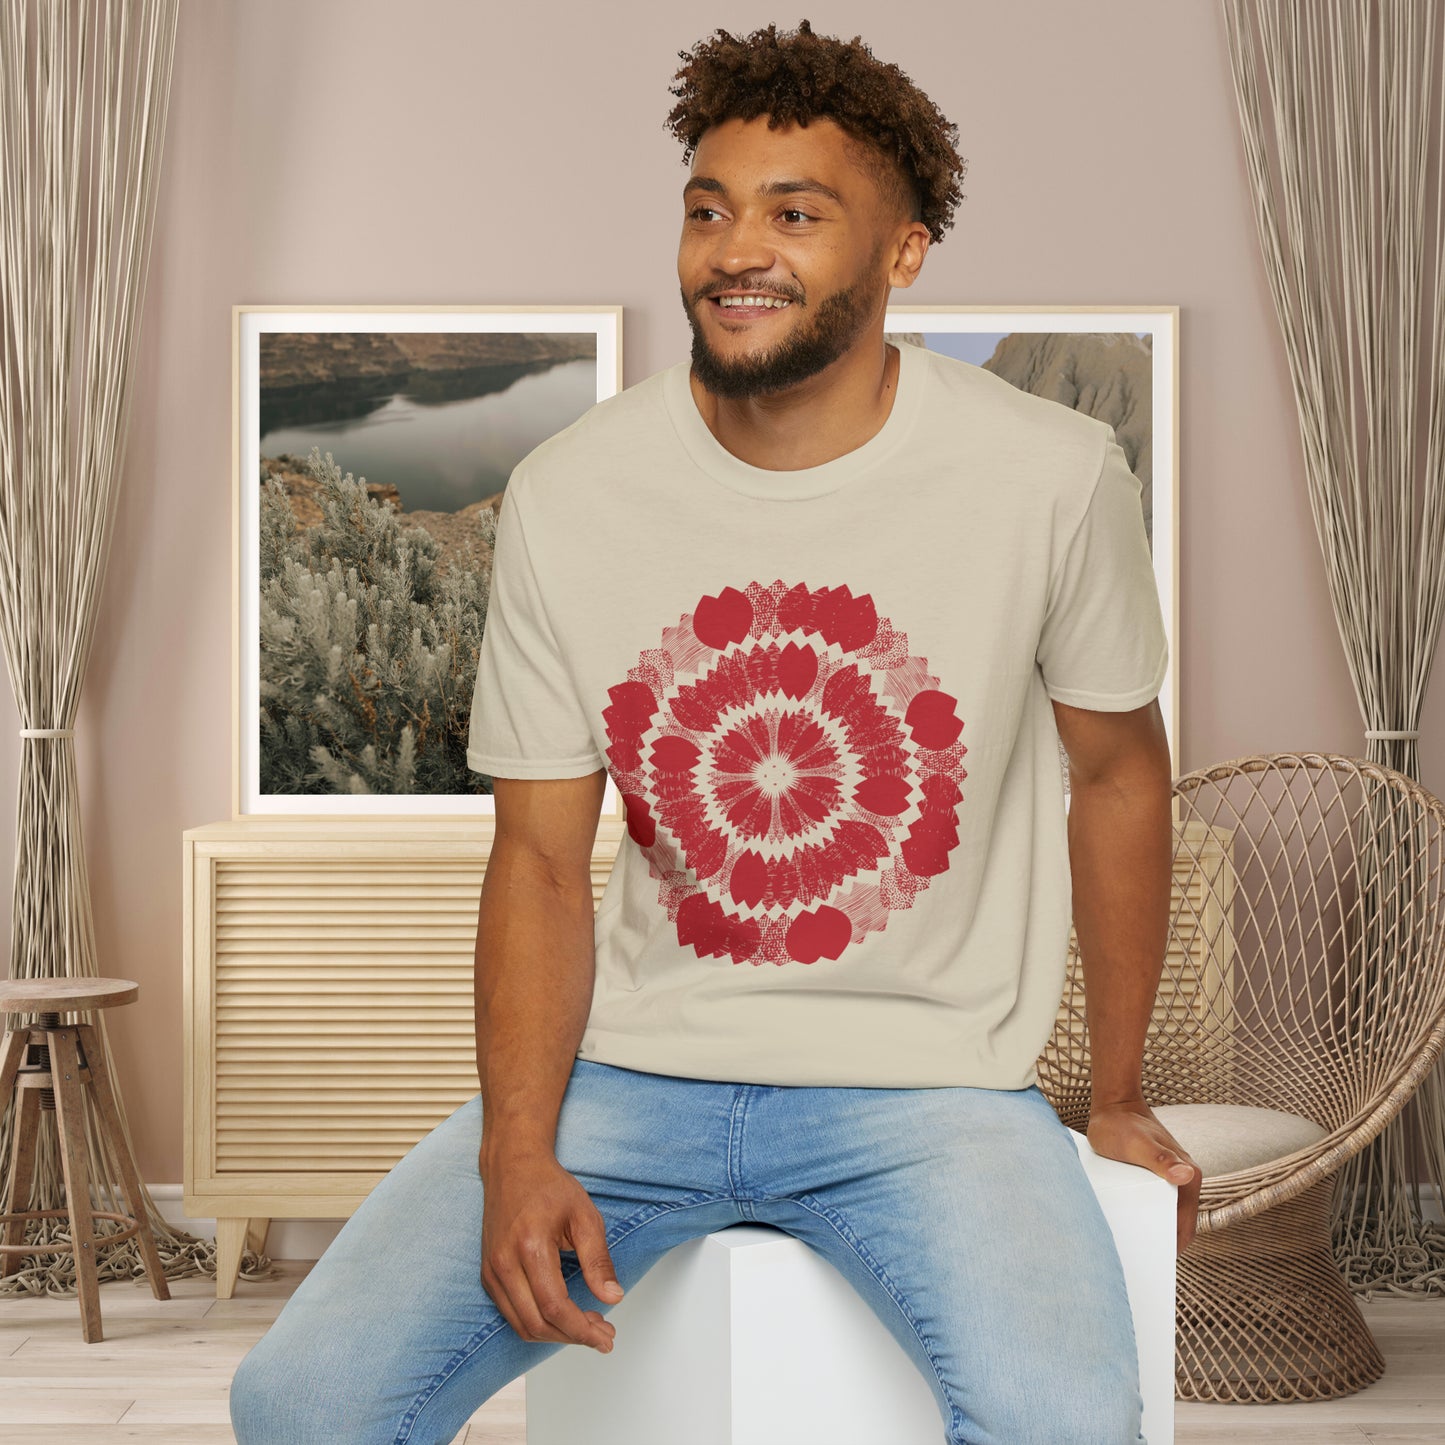 Abstract pattern design waiting for you to enjoy on this is a Unisex Softstyle T-Shirt.